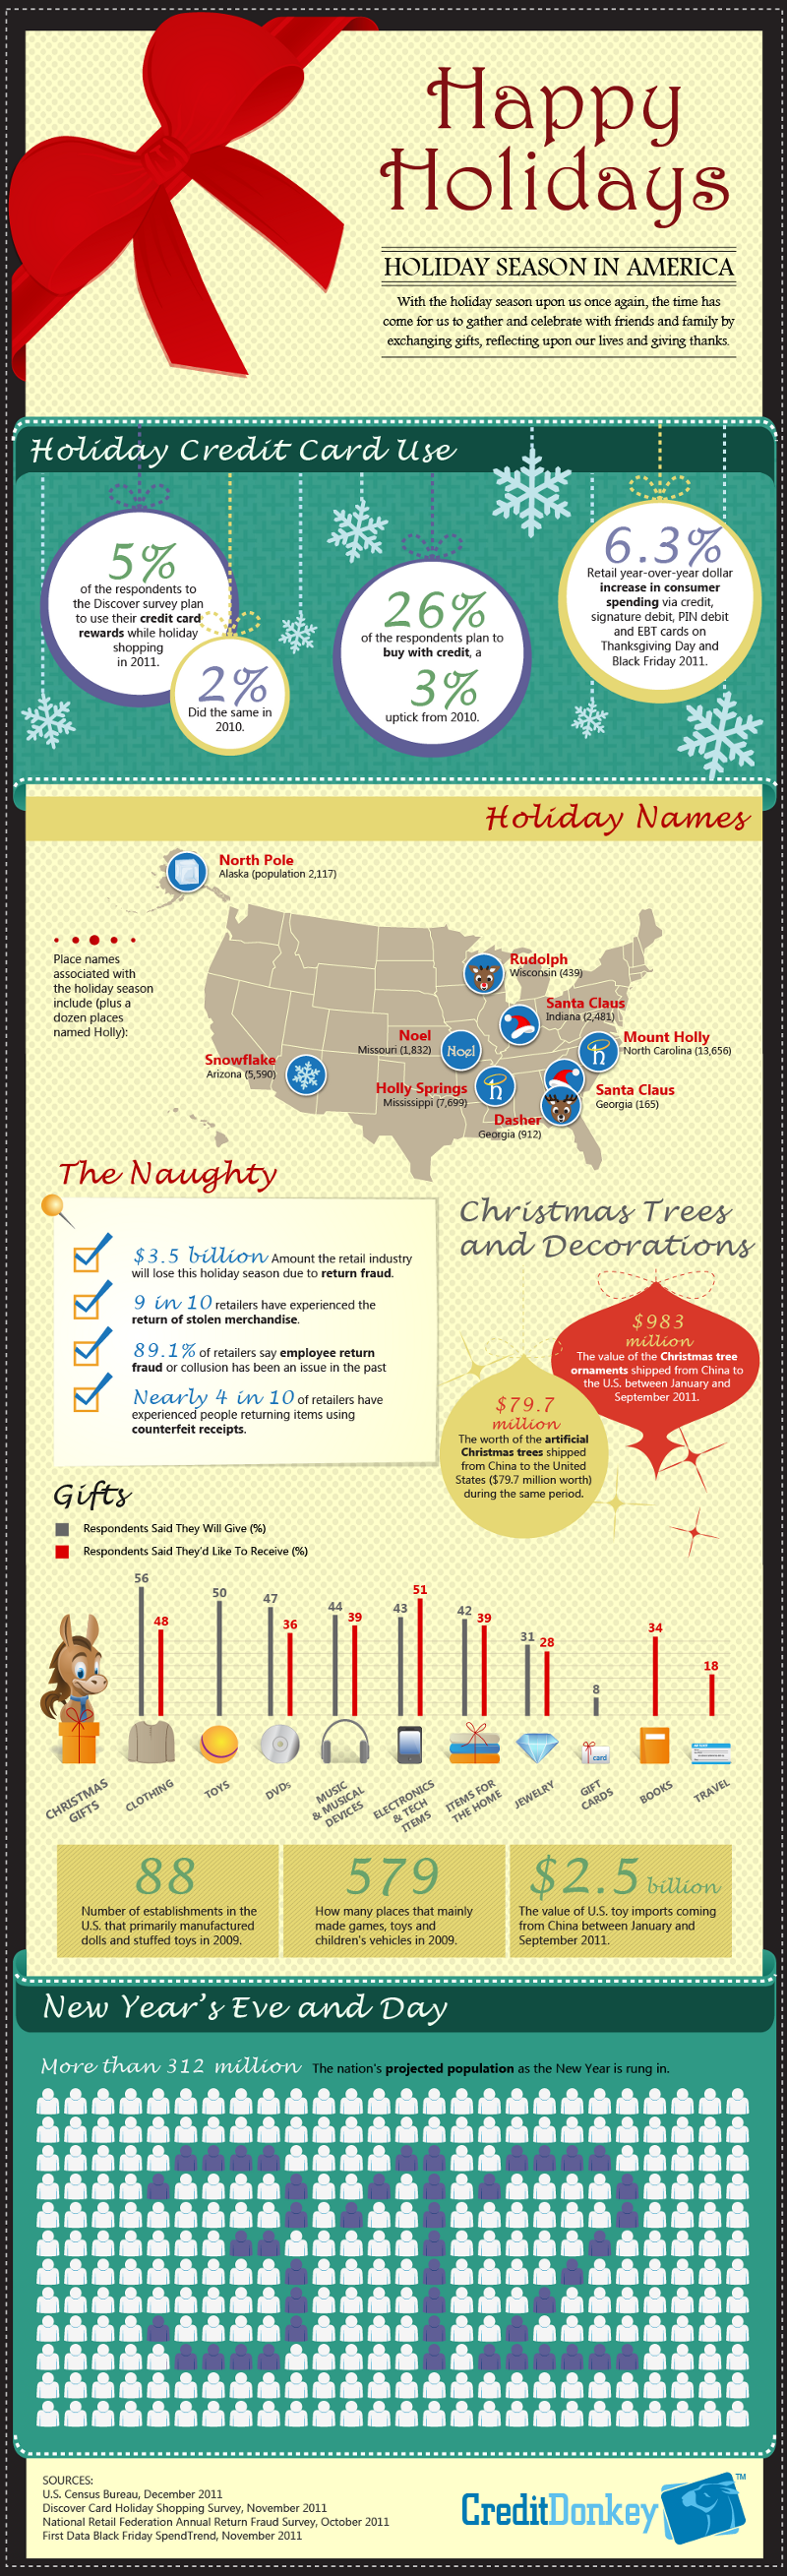 Happy Holiday Facts and Stats